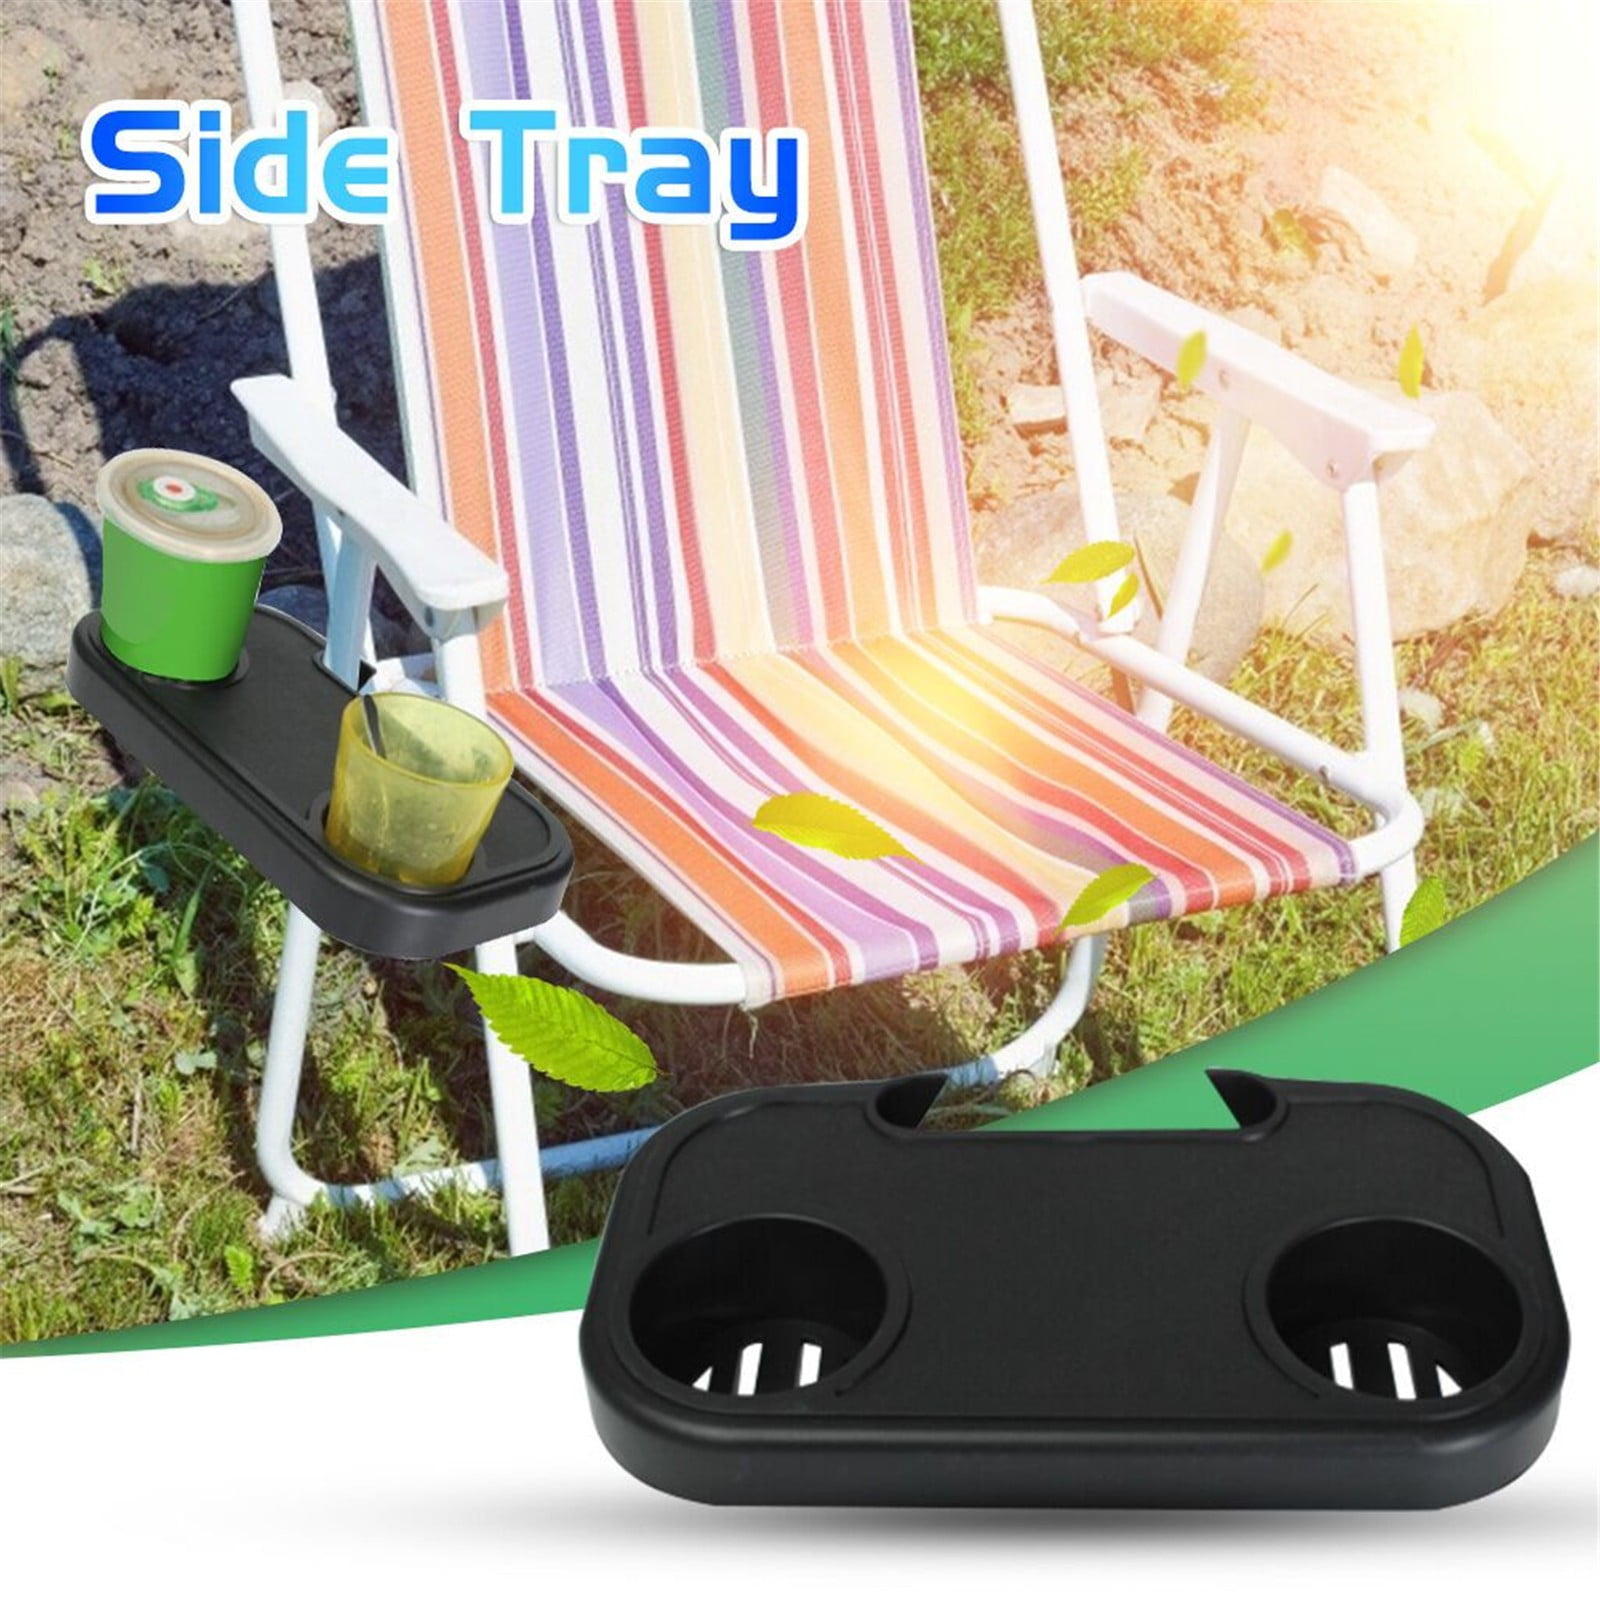 Portable Folding Camping Picnic Outdoor Beach Garden Chair Side Tray For Drink